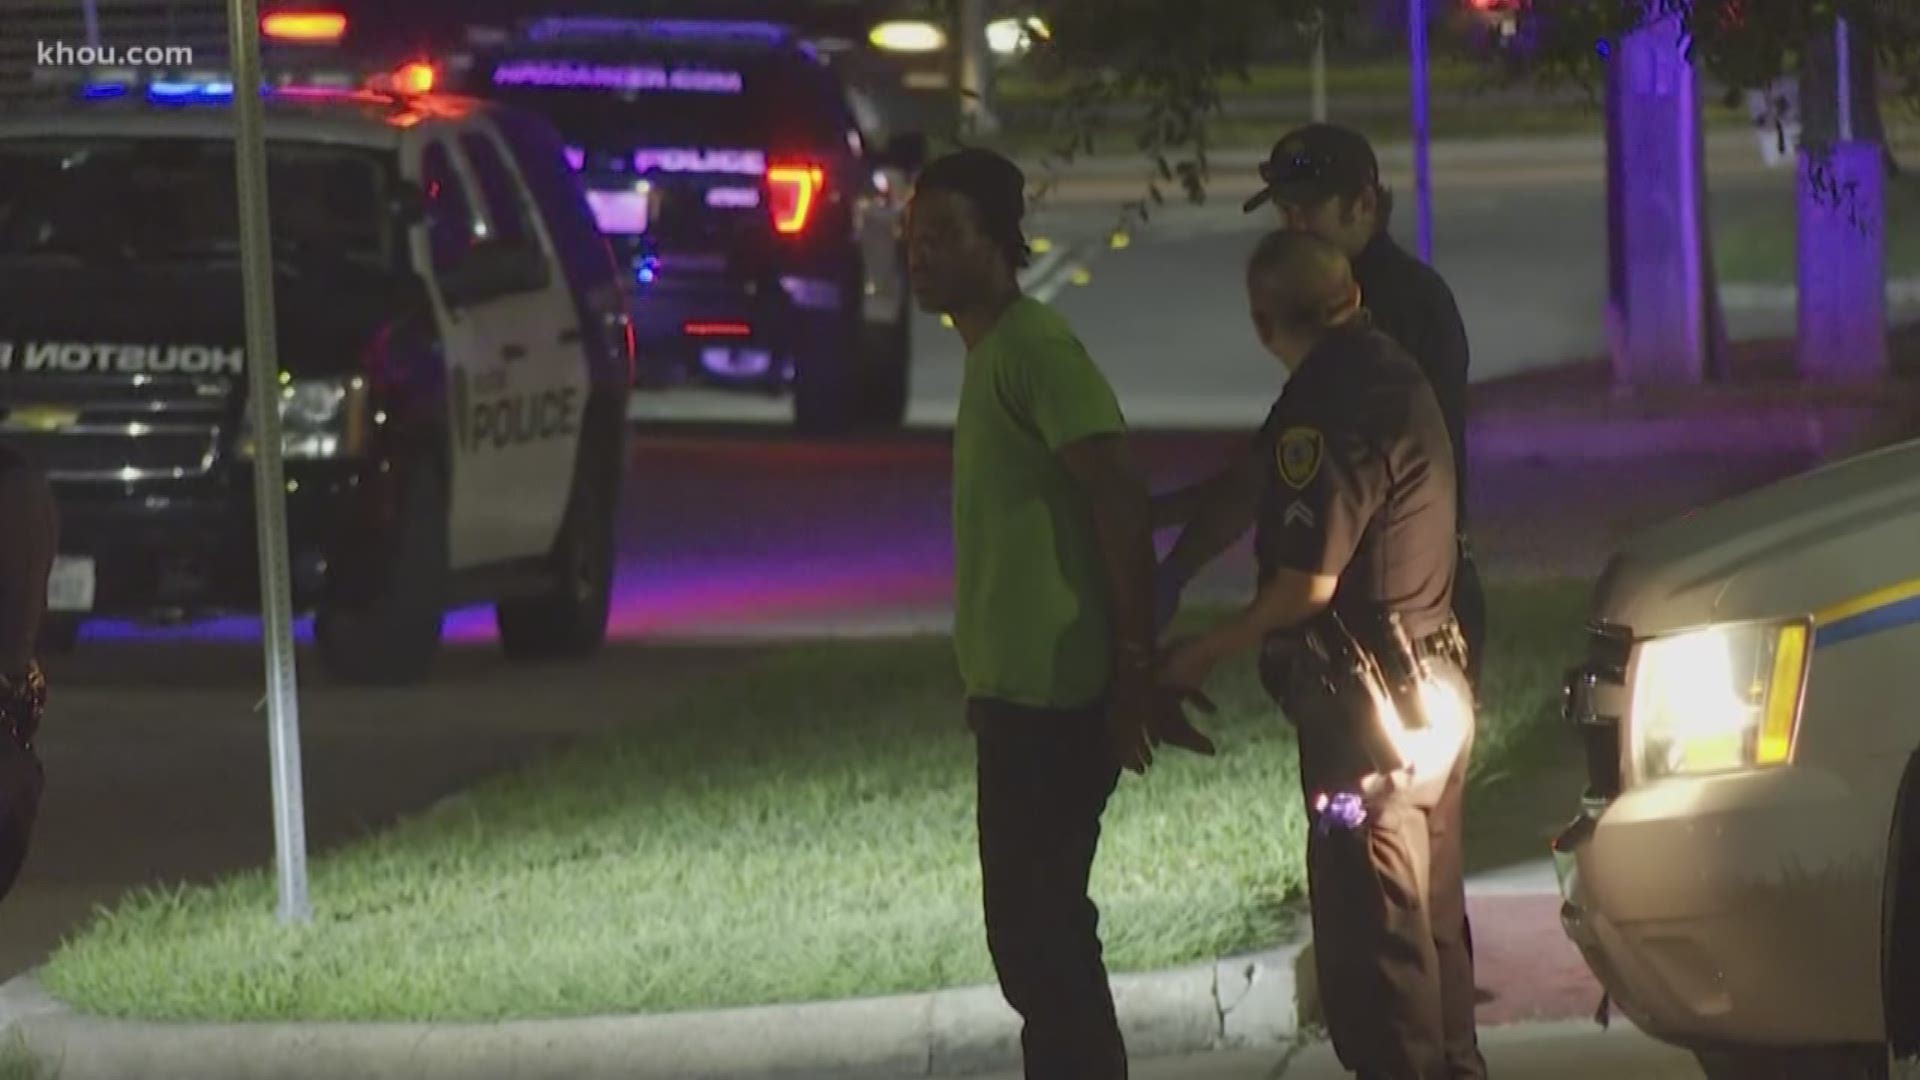 A man was walking around an apartment complex flashing a gun at people, including children, according to Houston police. HPD says the guy managed to slip out of the complex, but using social media he was found, with his gun, at the McDonalds in midtown.